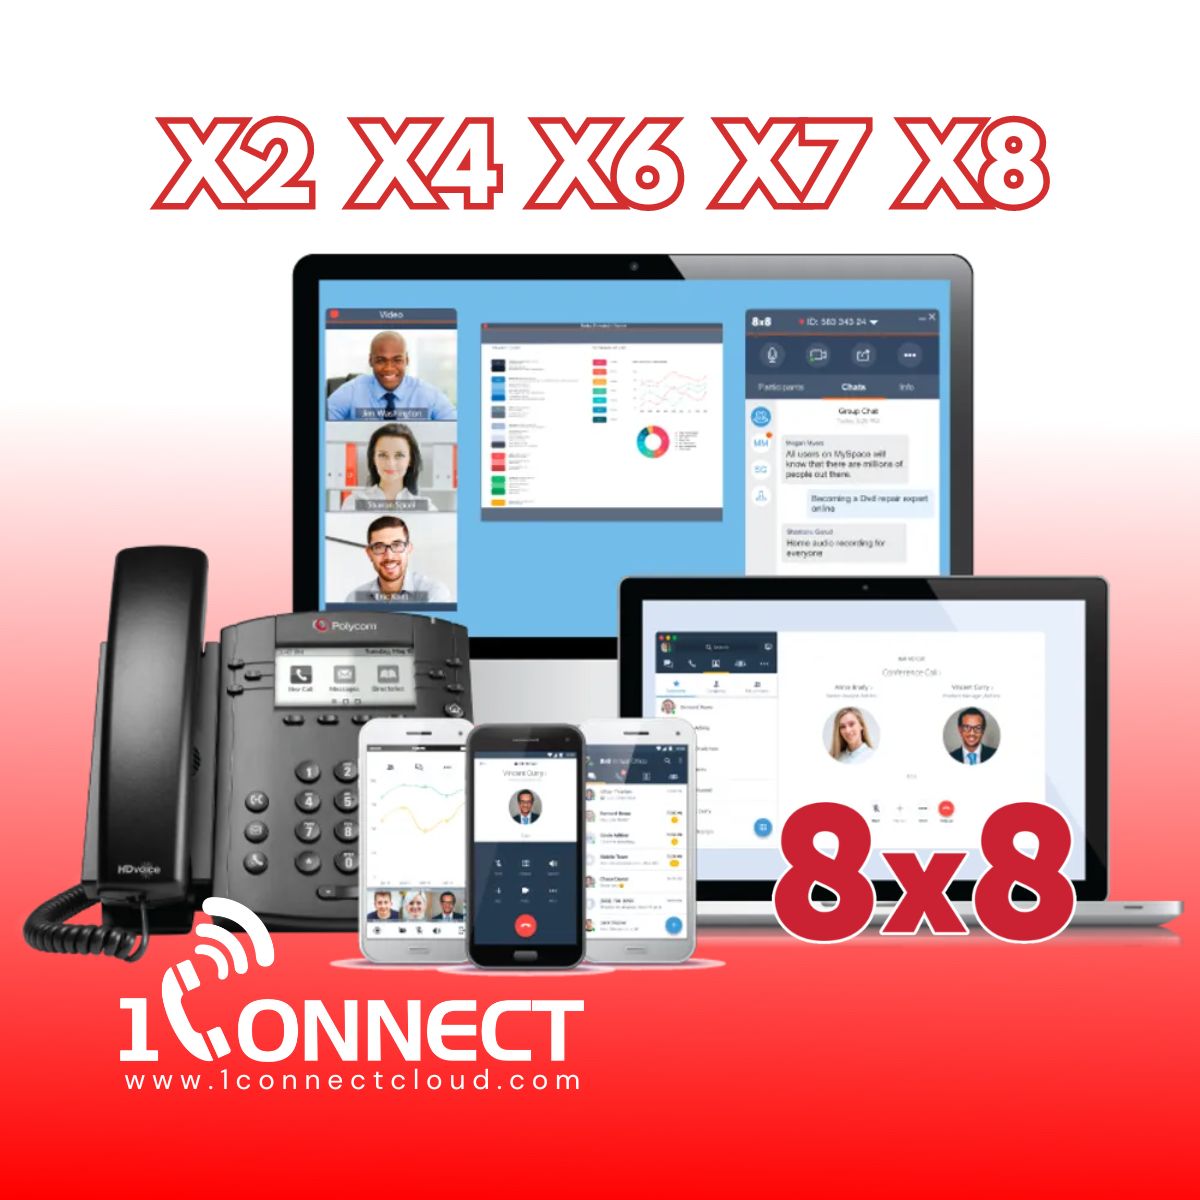 Communications 10 1Connect Ltd - Bringing IT and Communications Together